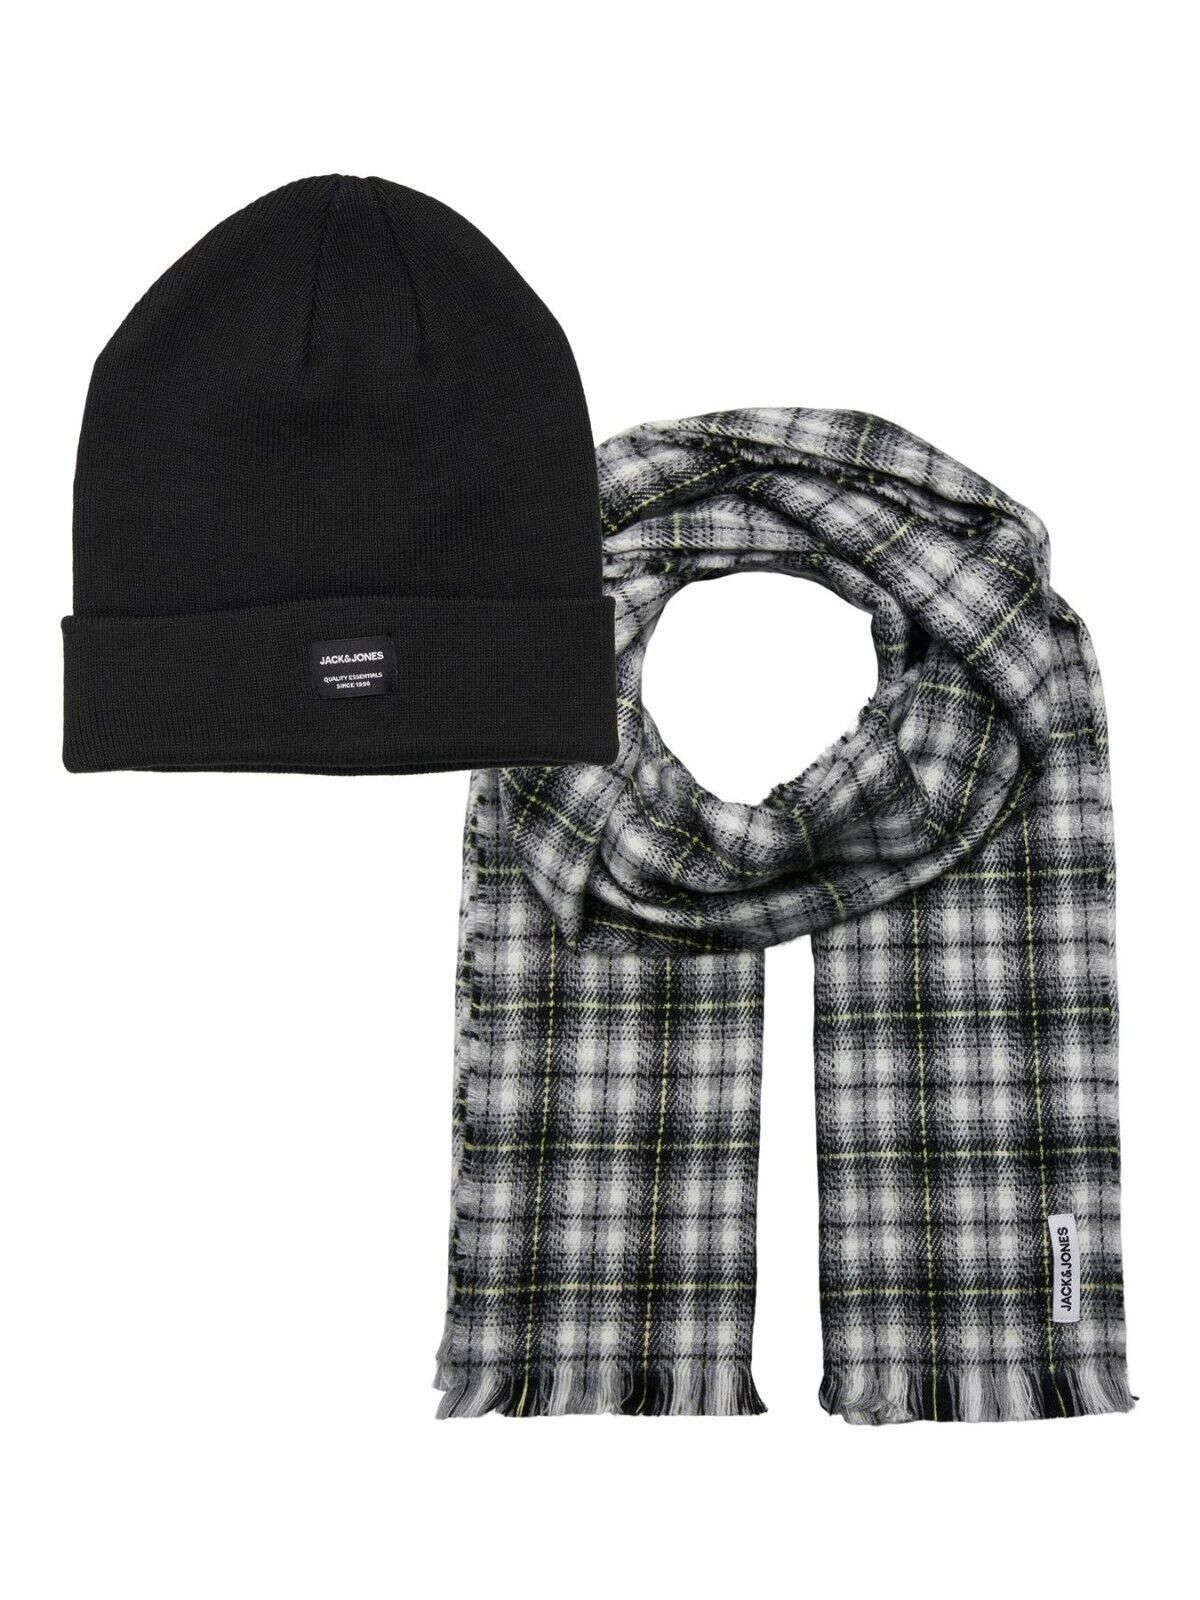 Mens Gift Box Jack & Jones Beanie Hat & Scarf Set Checked Knitted Cold Winter